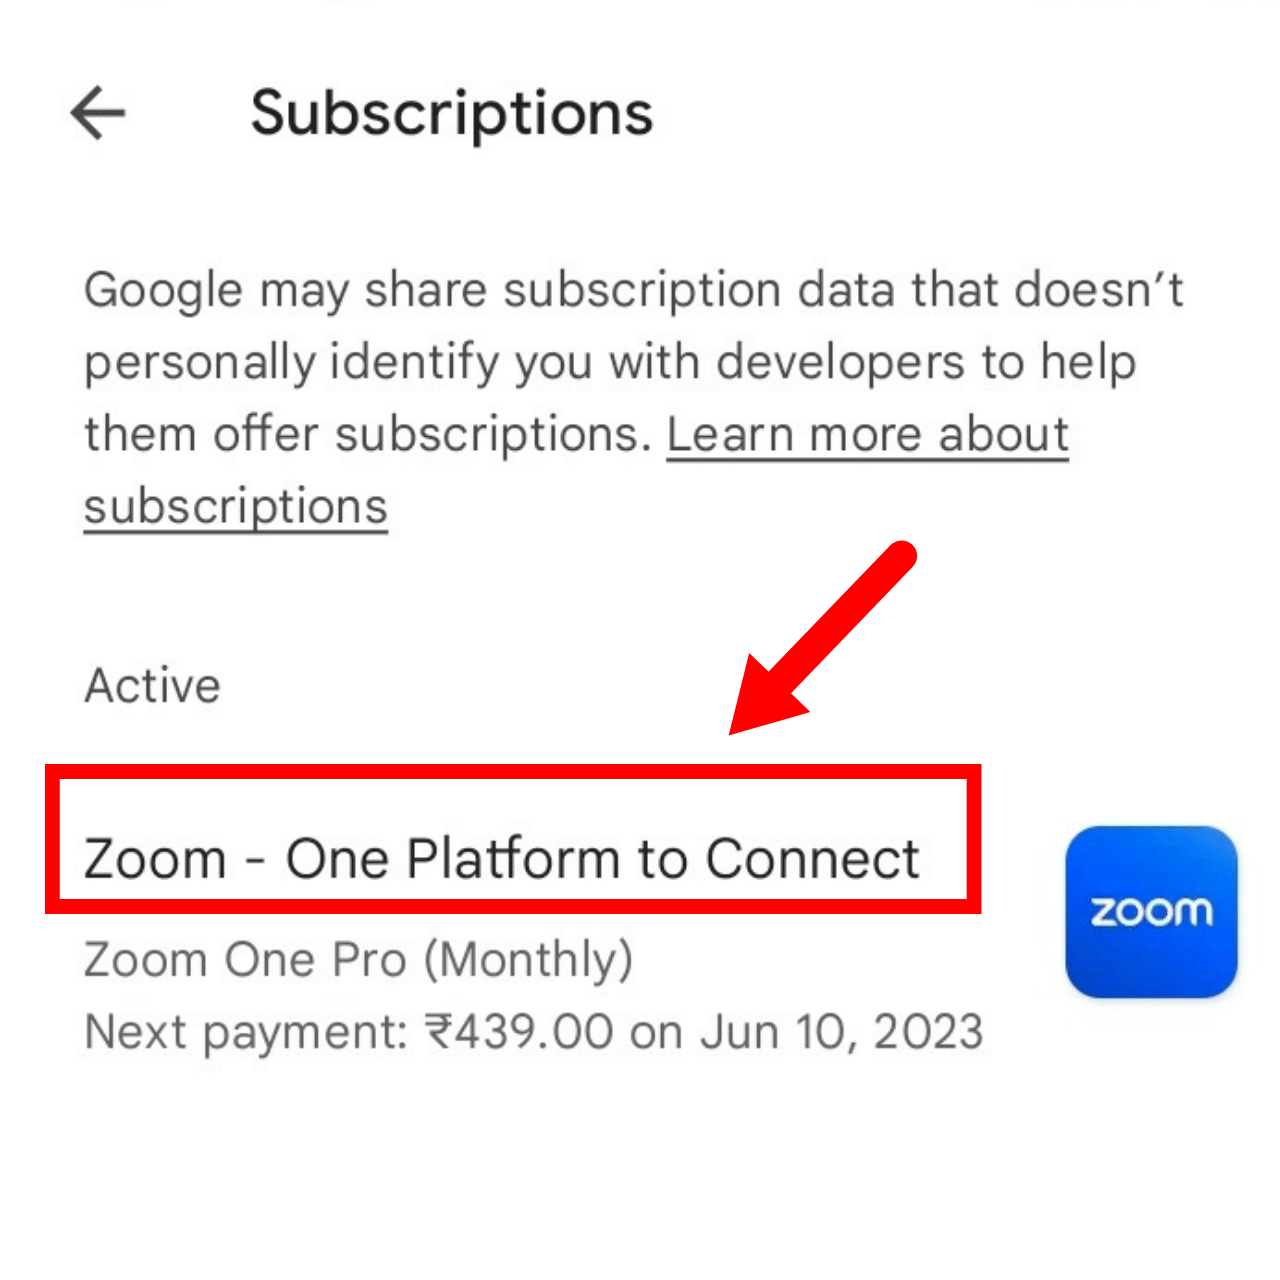 click zoom to find subscription details